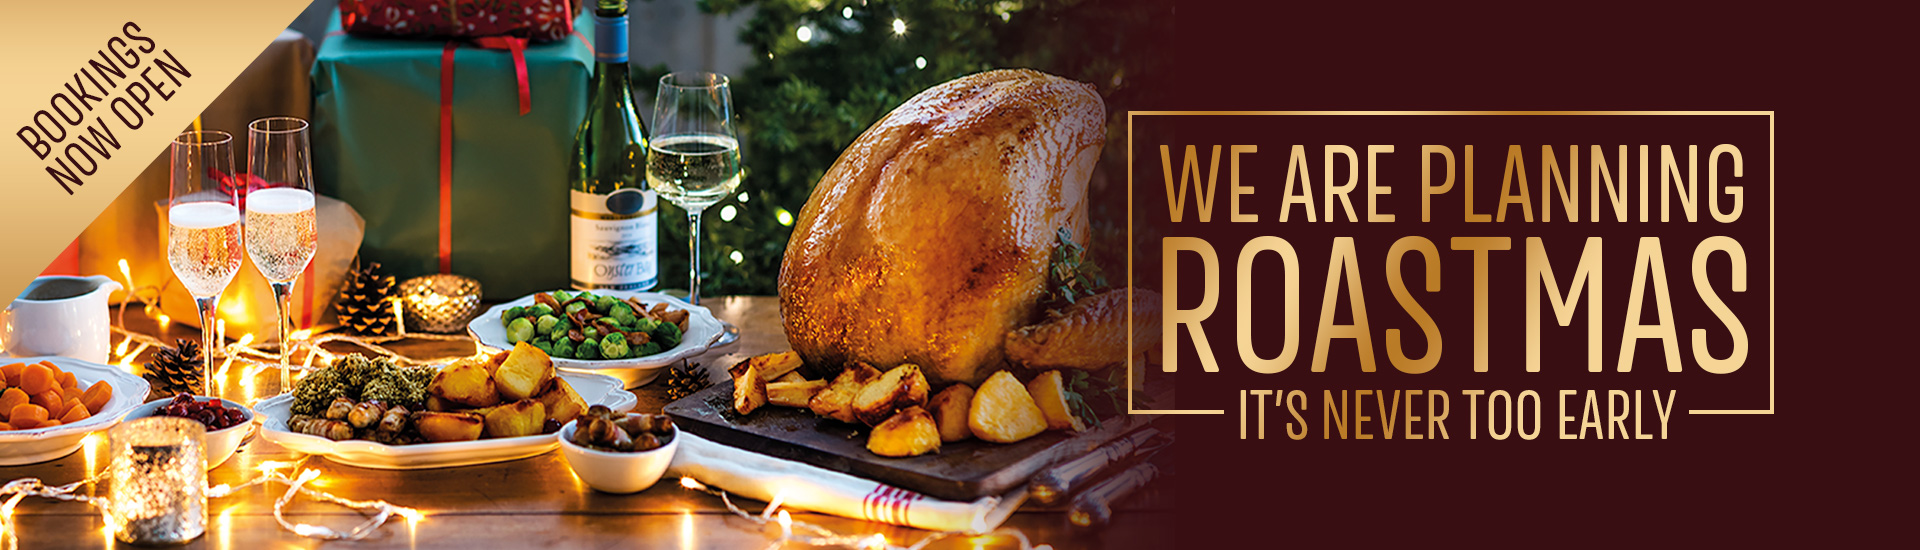 Christmas 2022 at your local Toby Carvery Horsforth | Home of the Roast